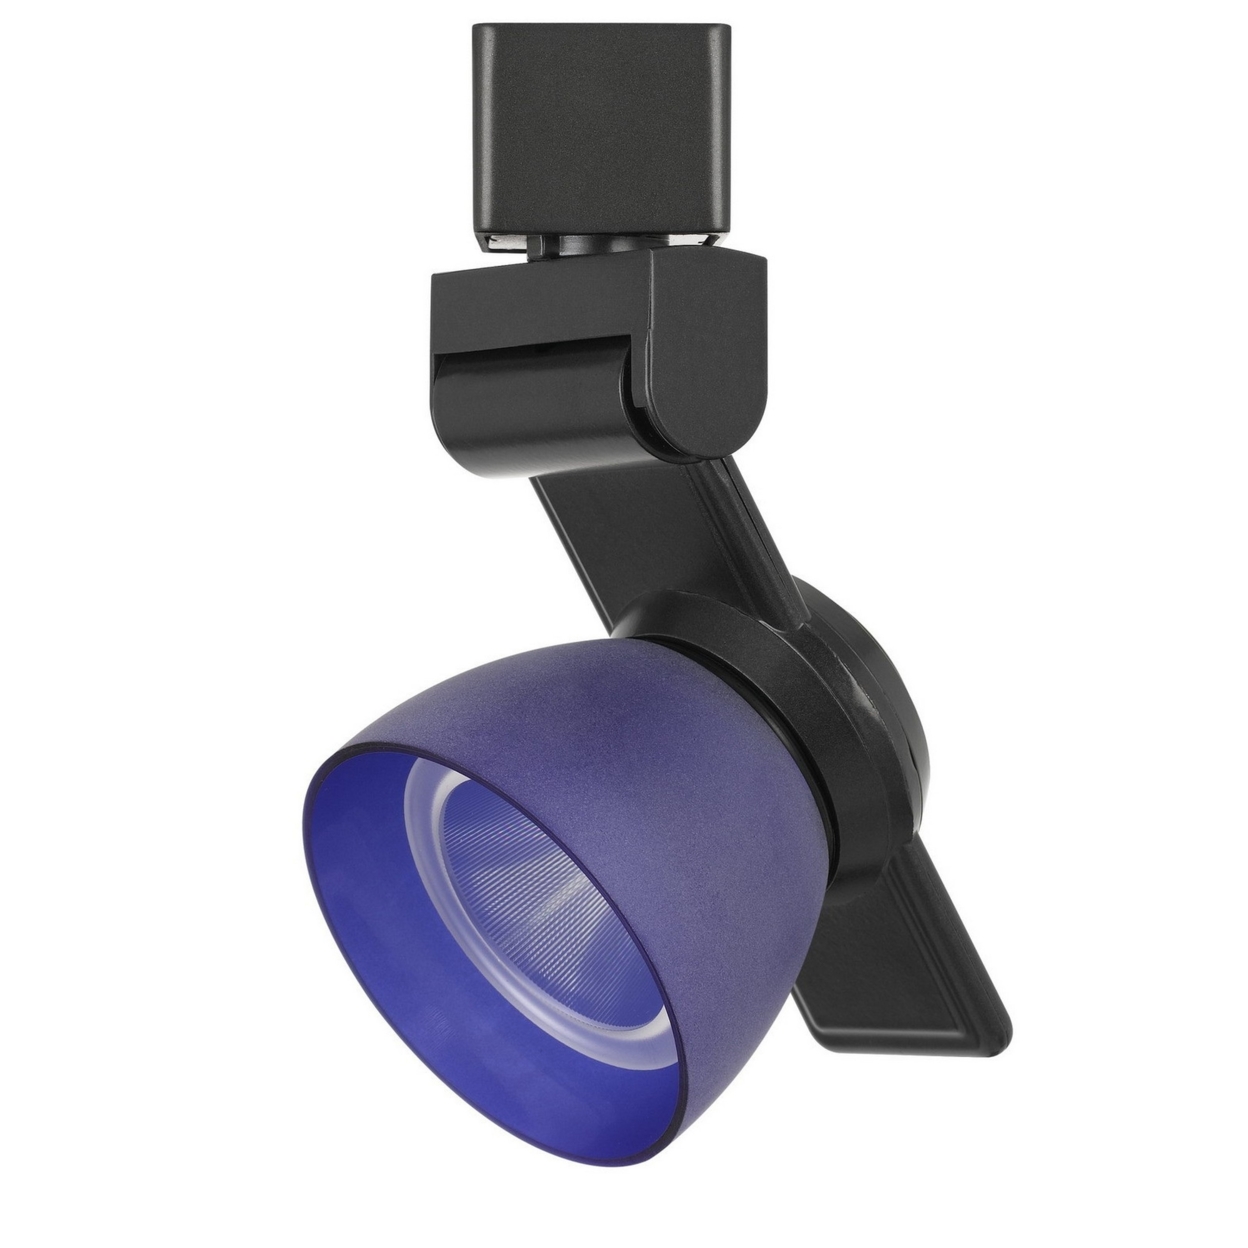 12W Integrated Metal And Polycarbonate LED Track Fixture, Black, Blue Shade